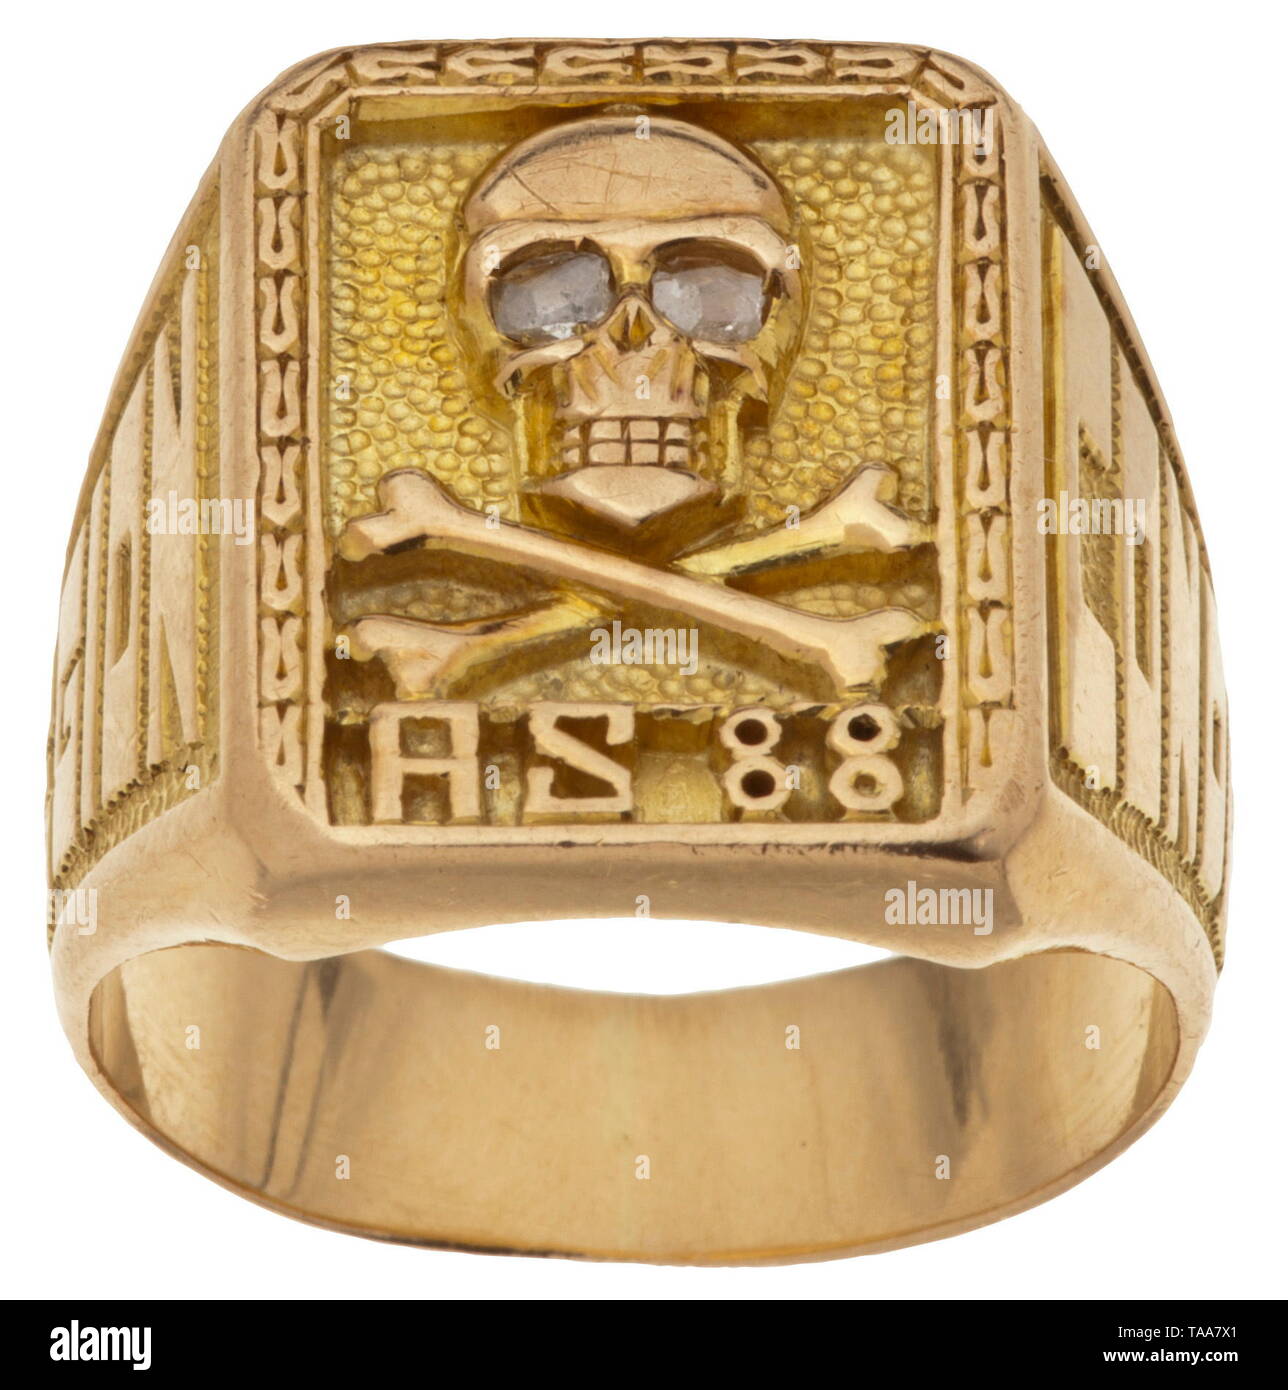 A Condor Legion honour ring Handwork in .750 yellow gold, relief-work, punched, at top a death's head with diamond eyes and crossed bones, below 'AS 88' for Staffel 88 (sea reconnaissance), laterally the lettering 'Legion' and 'Condor'. The inner surface of the ring band engraved 'B.S.'. Light signs of usage and age. Weight 19.4 g. Awarded by Hermann Göring to the eleven Staffel 88 pilots for exceptional merit. historic, historical, Wehrmacht, armed forces, unit, units, troop, troops, NS, National Socialism, Nazism, Third Reich, German Reich, military, militaria, National S, Editorial-Use-Only Stock Photo